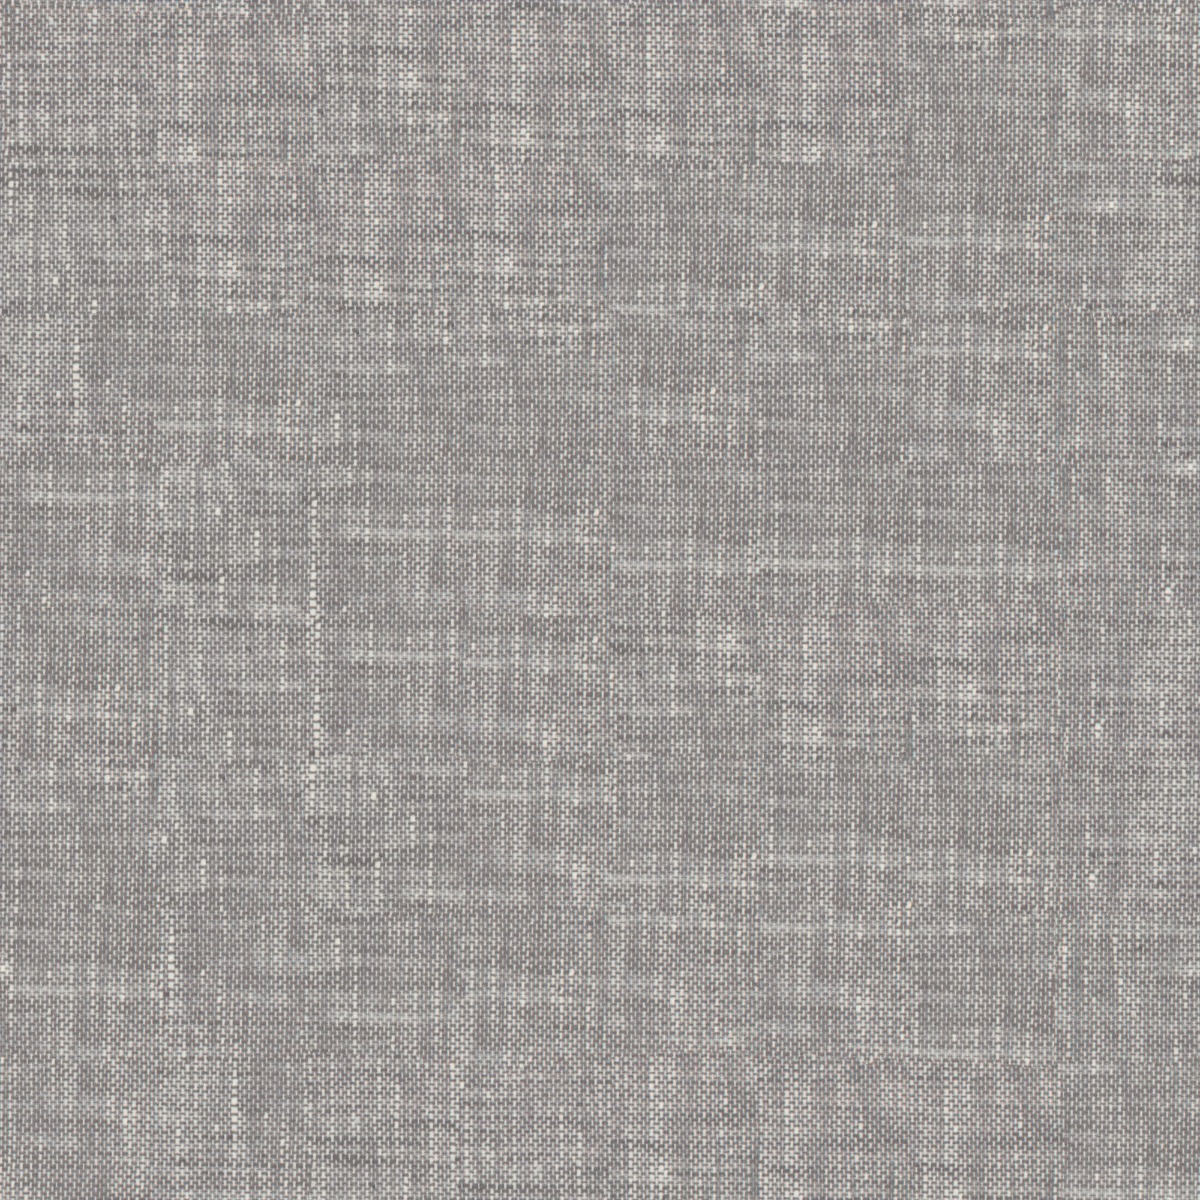 A seamless fabric texture with plain grey sheer units arranged in a None pattern